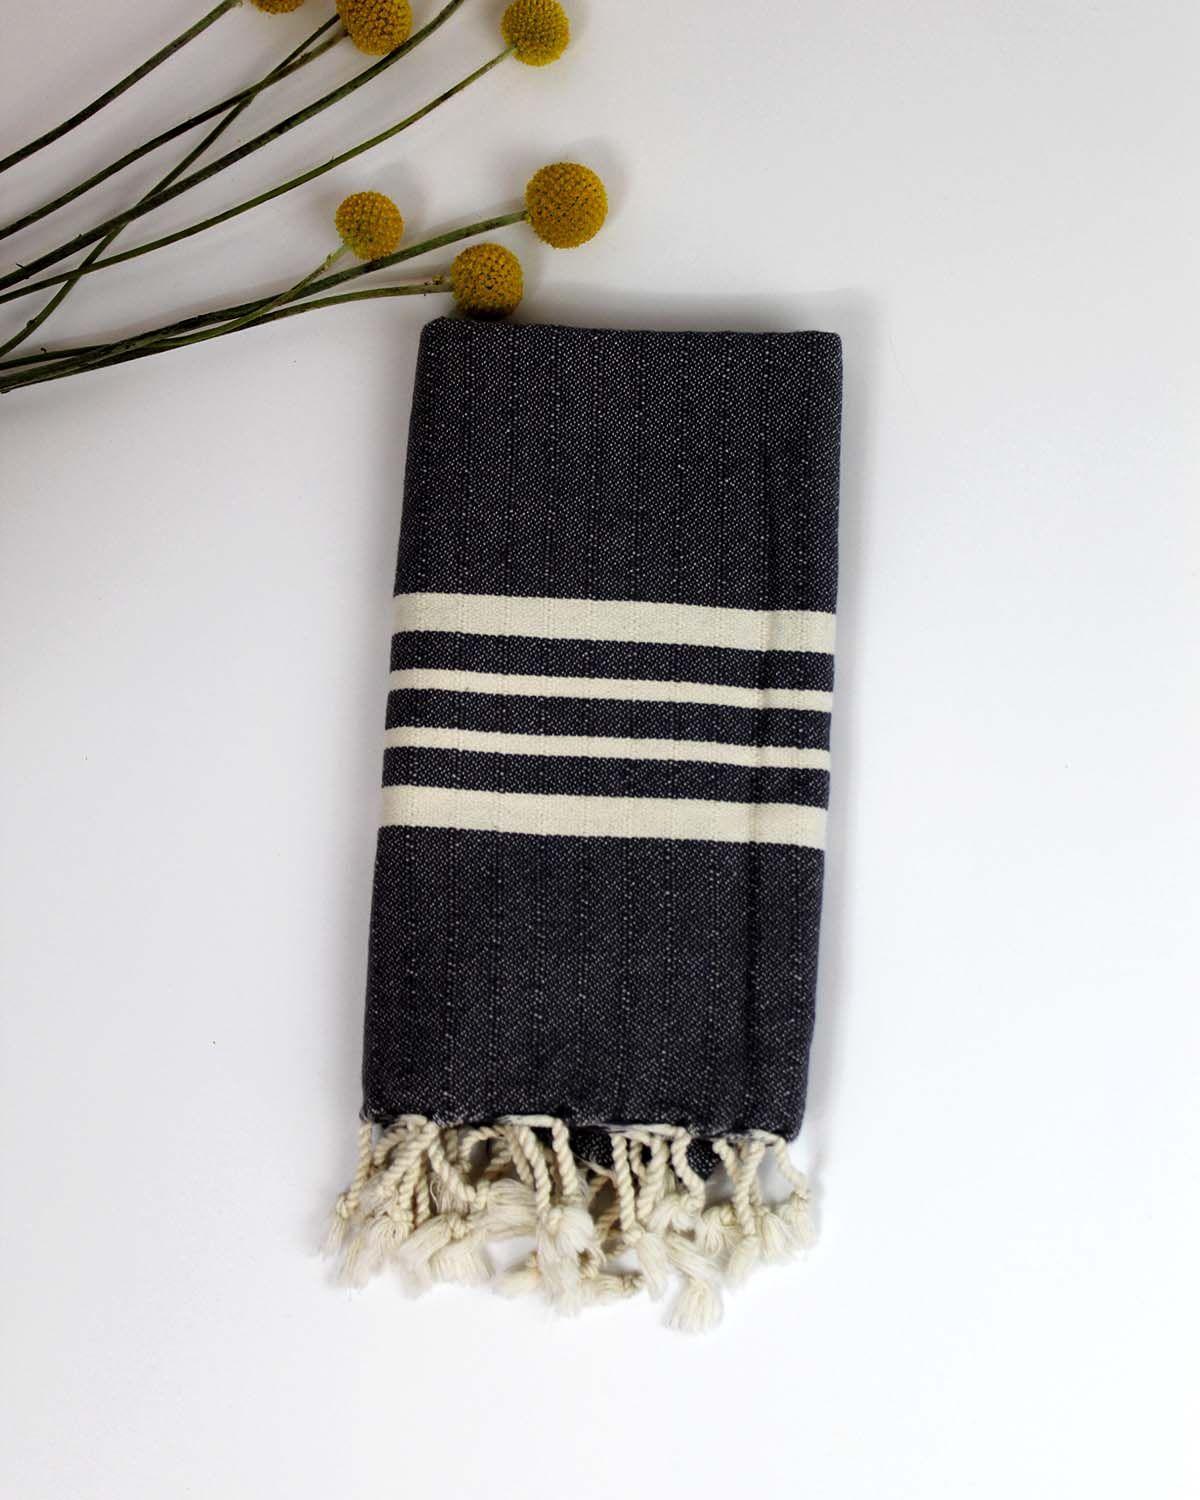 CLASSIC STRIPE HAND TOWEL (Set of Two)